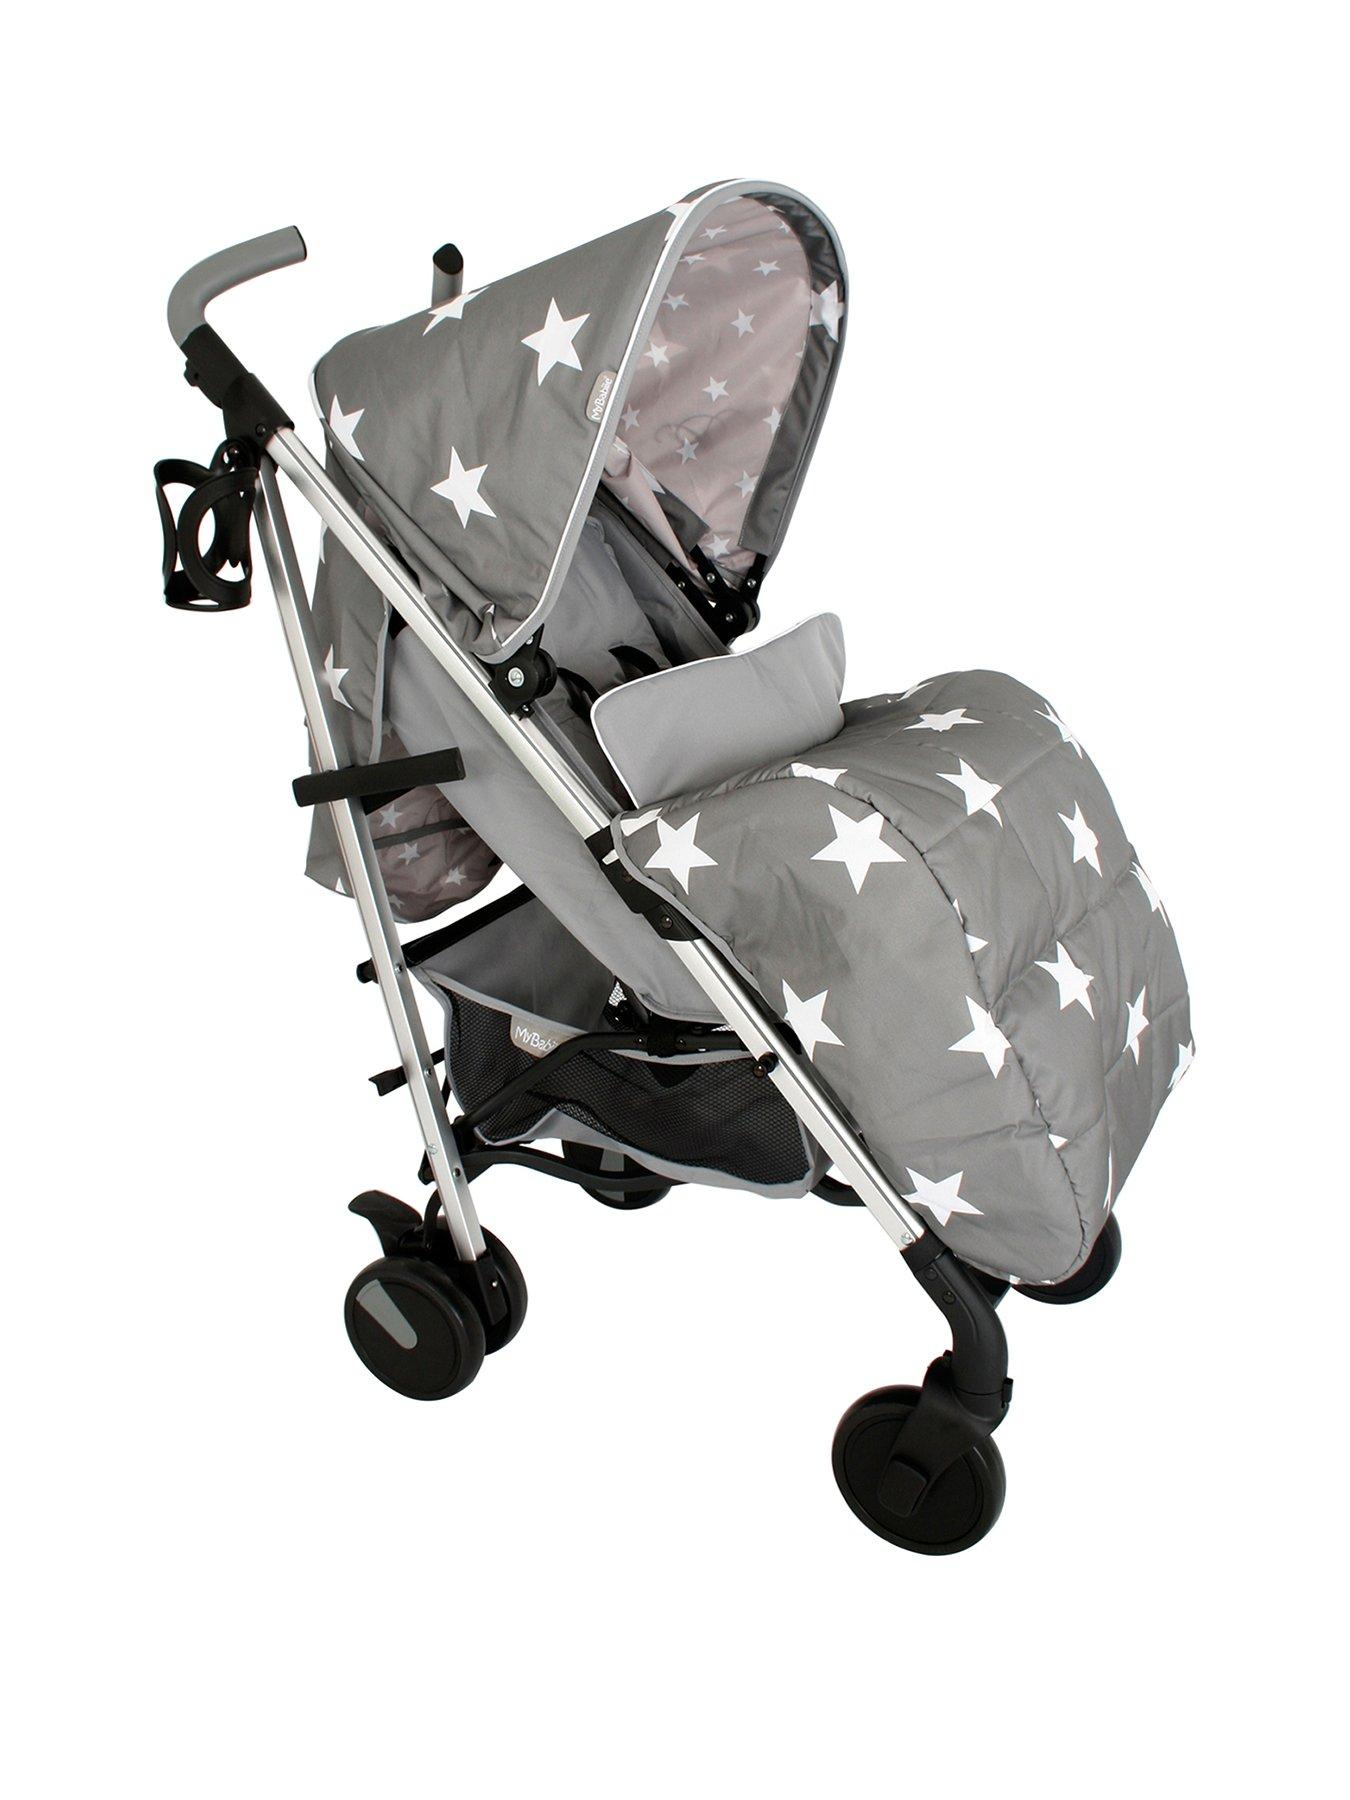 pushchairs and strollers uk